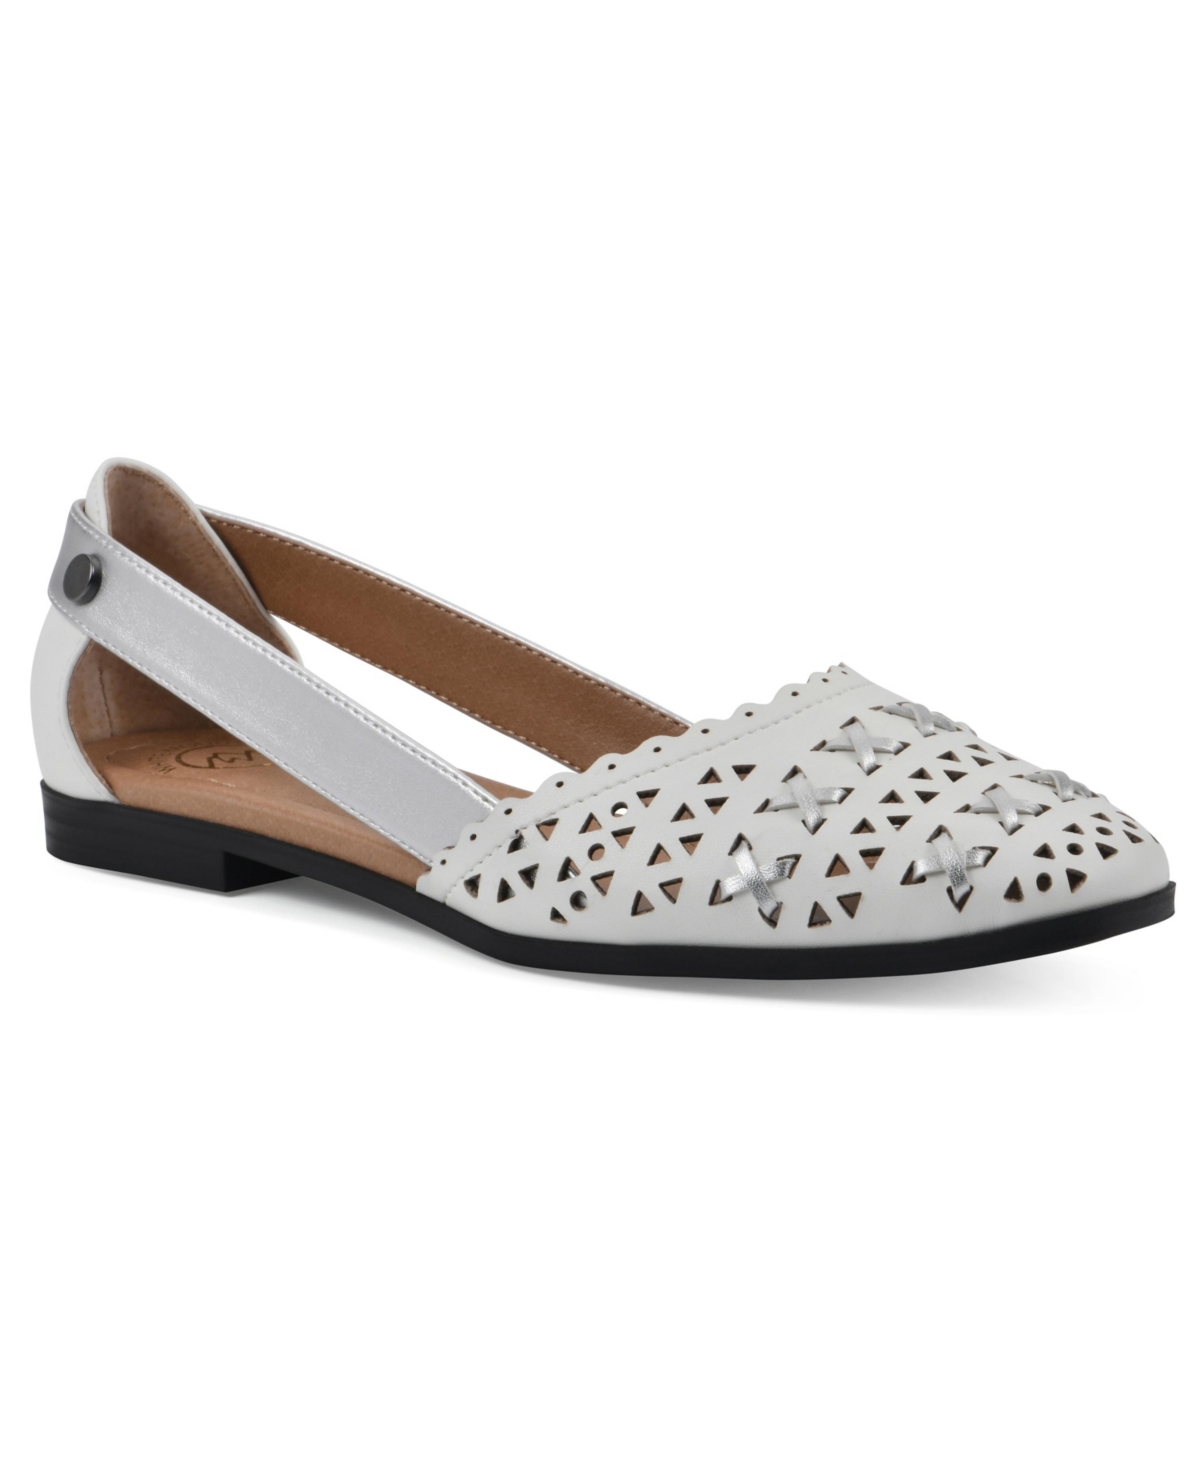 Women's Nobler Casual Flats - White Silver Smooth